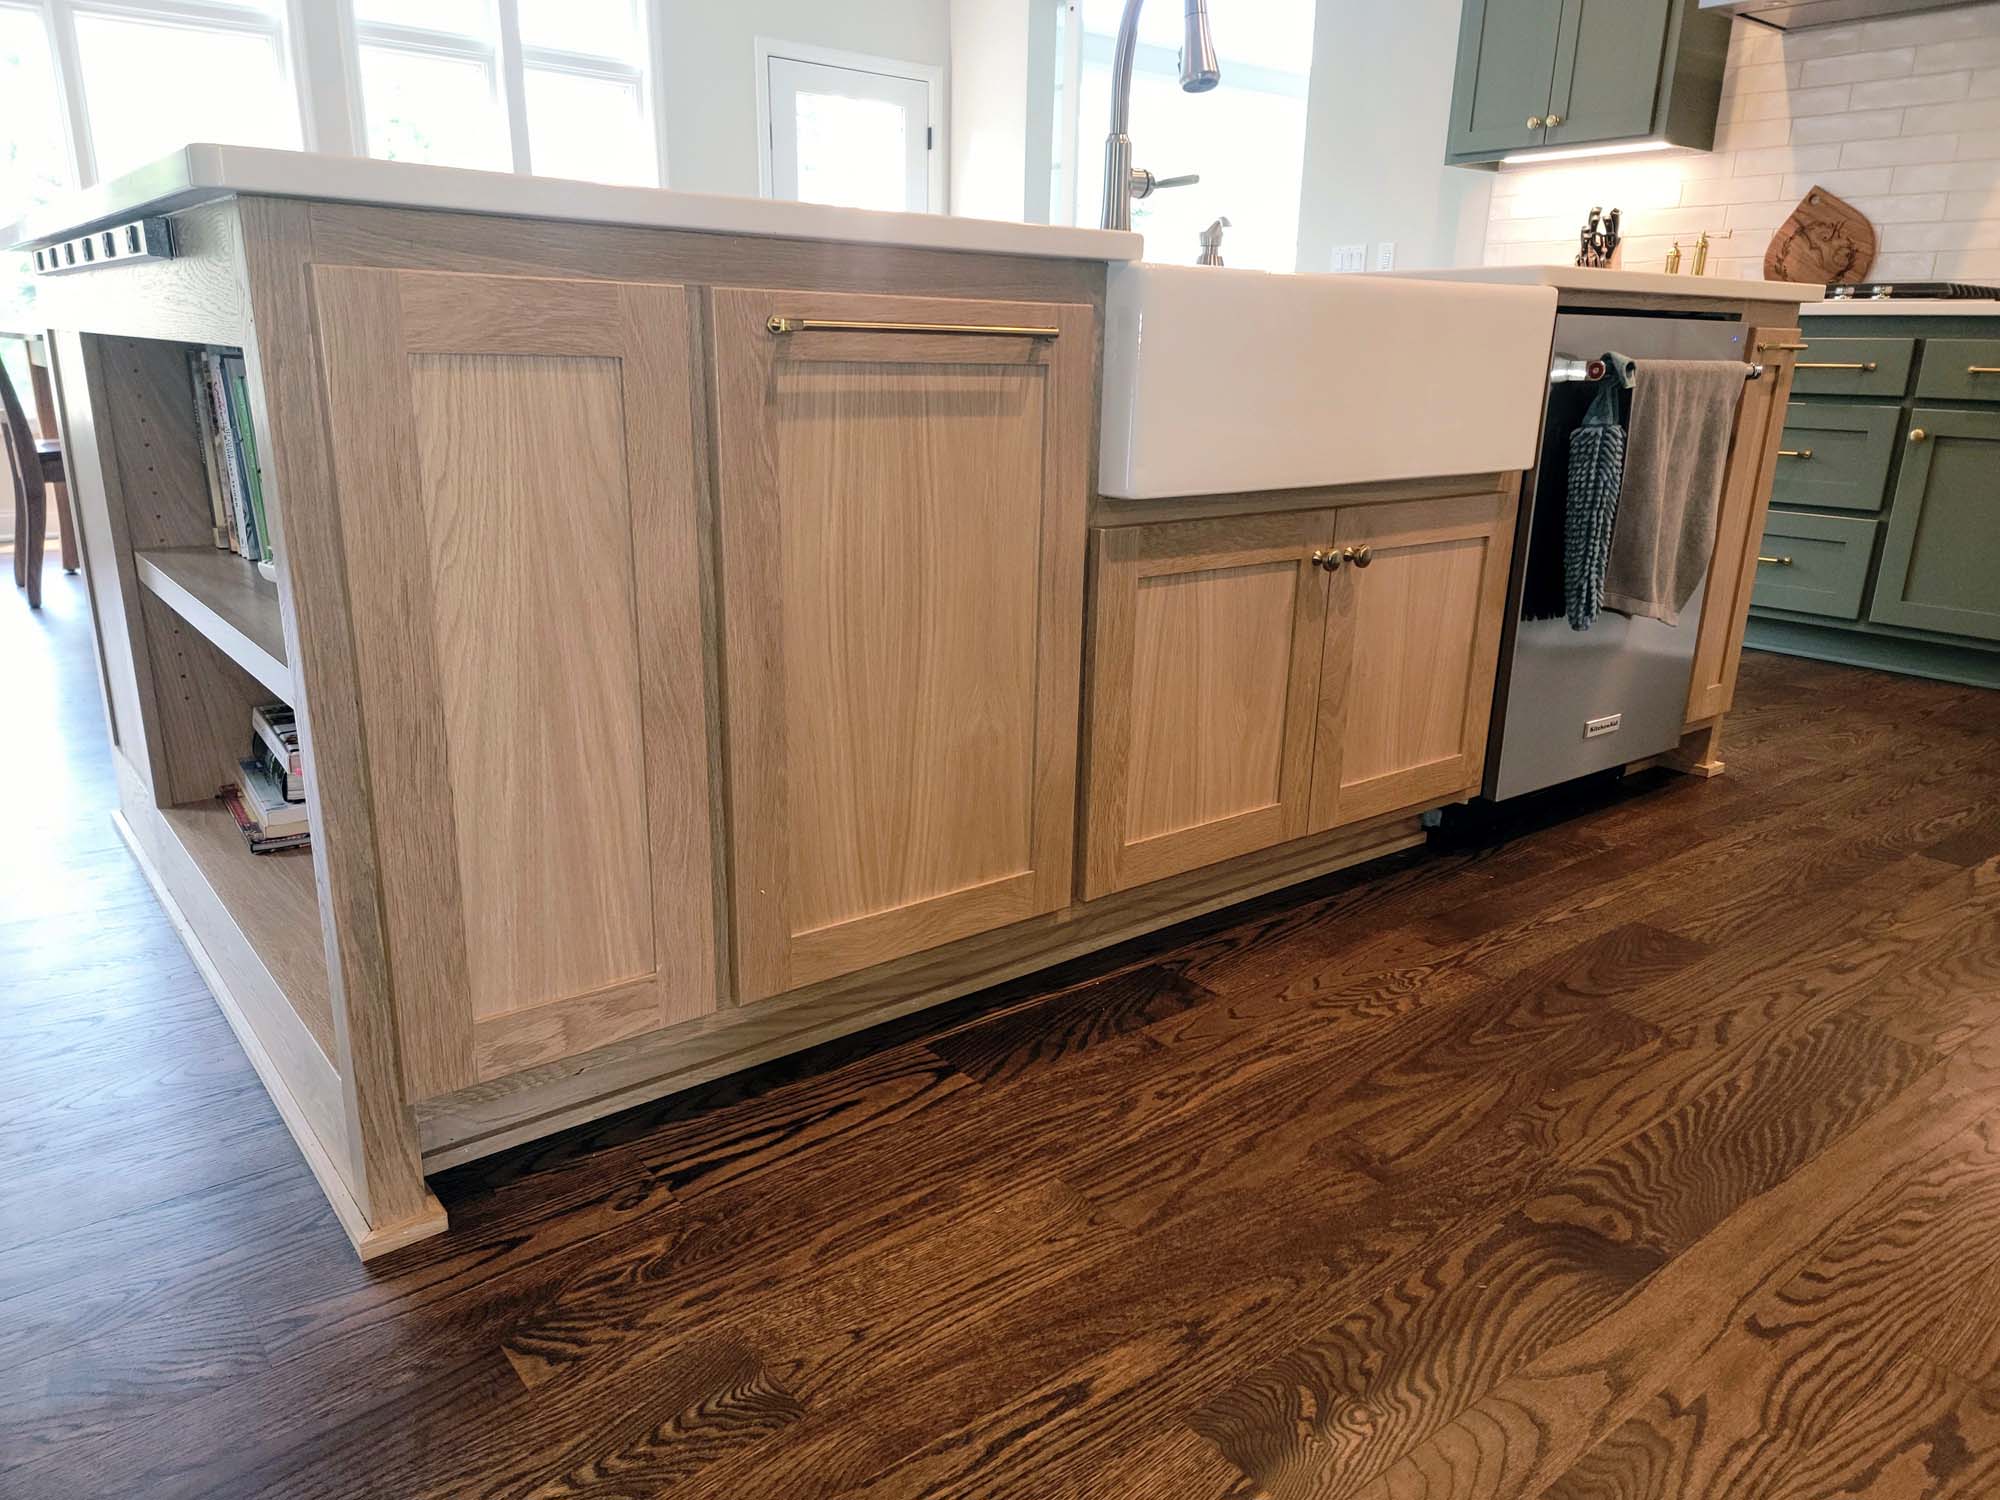 Nice contrast of wood floors with island cabinets